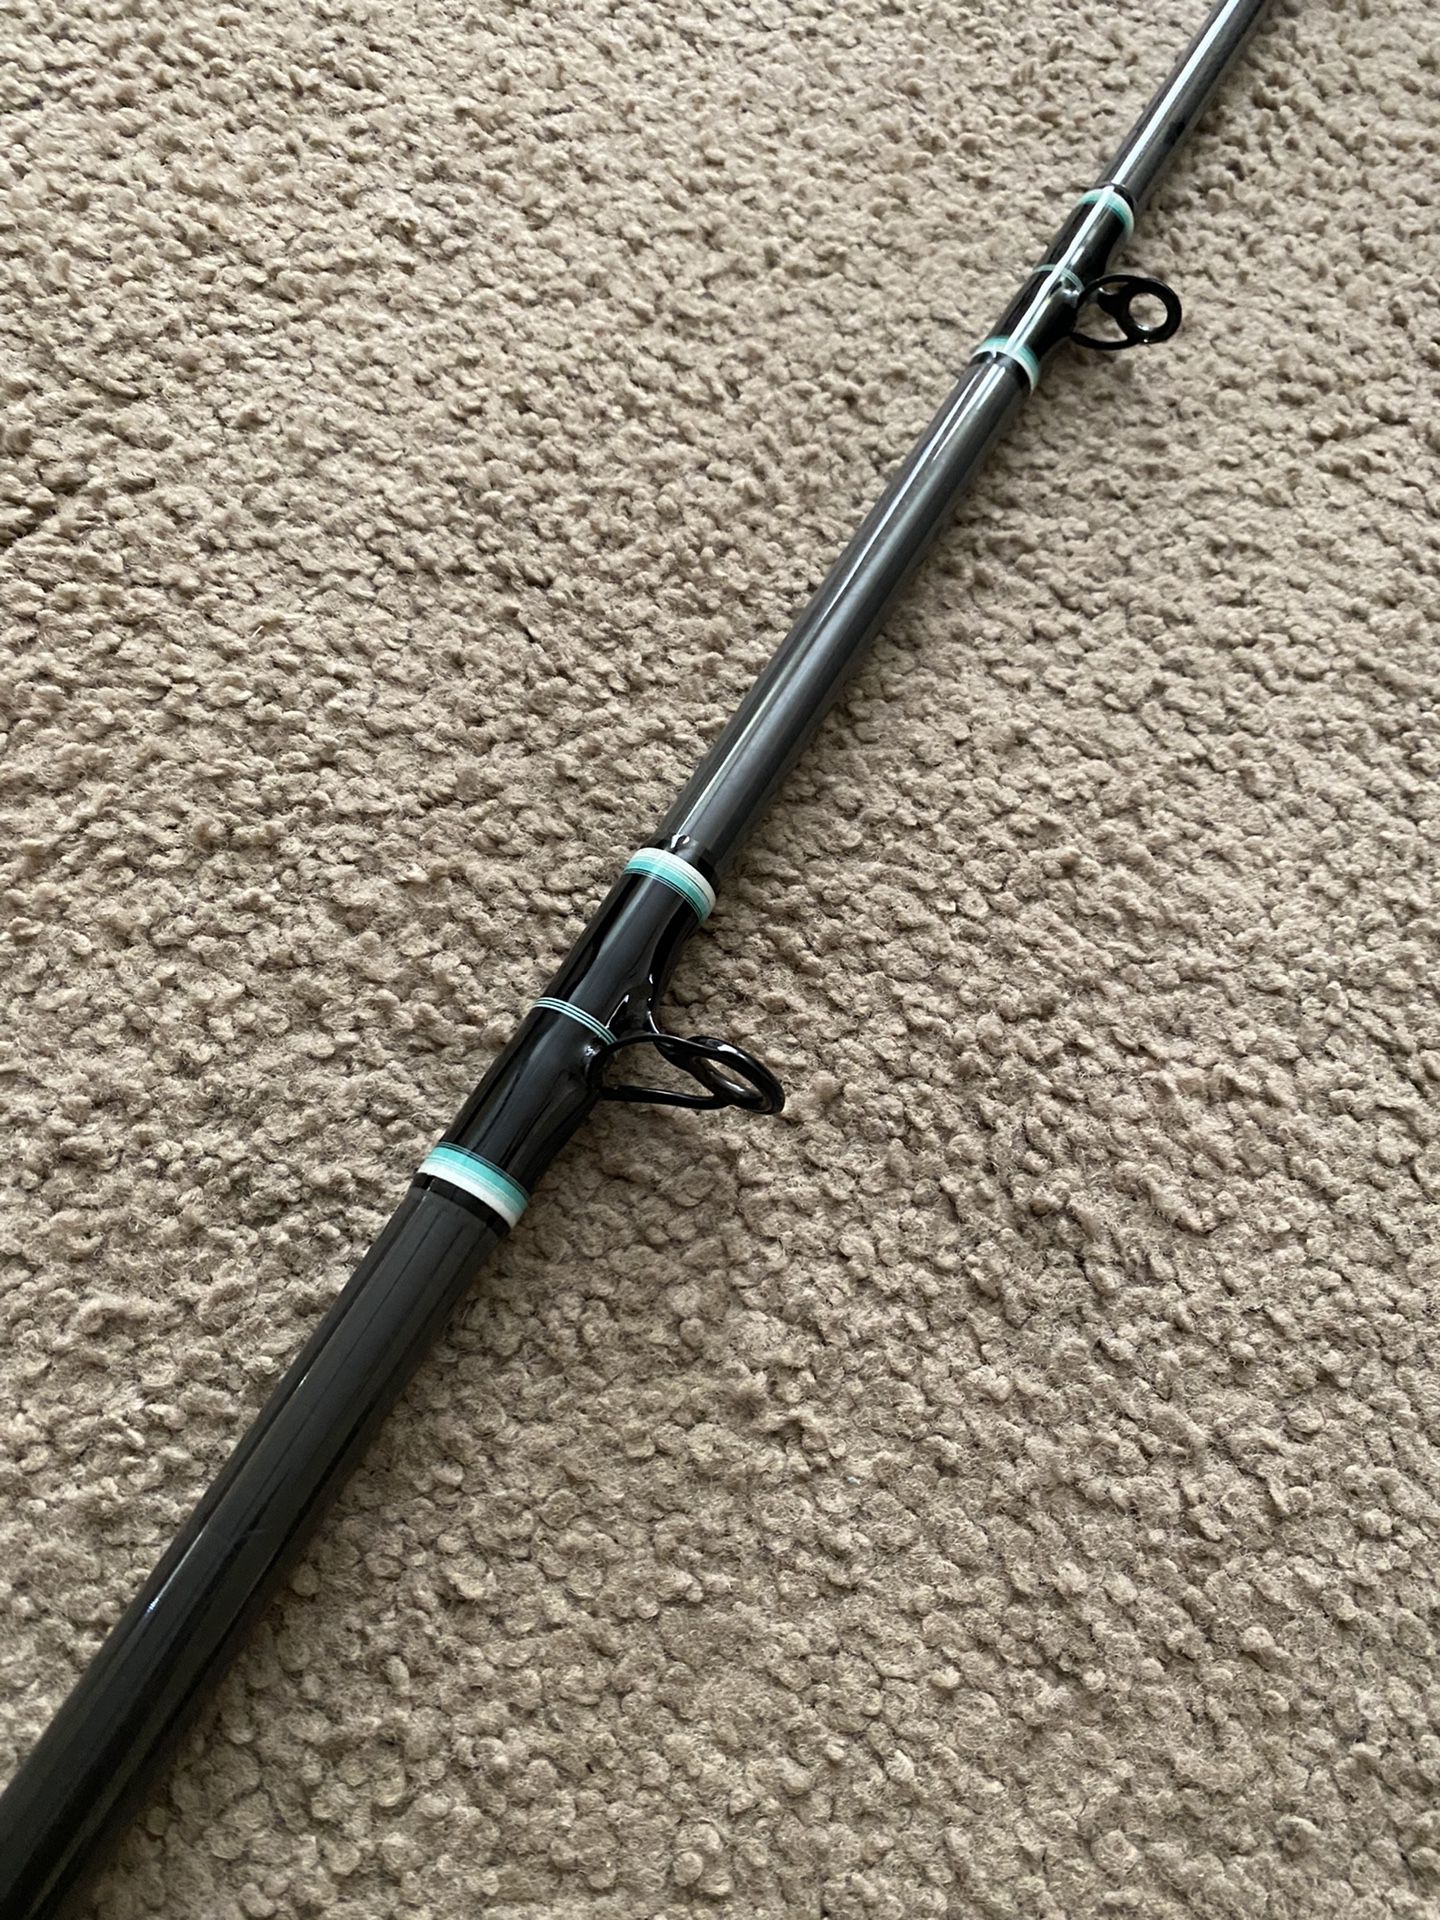 Calstar Gf 850h Fishing Rod for Sale in San Diego, CA - OfferUp